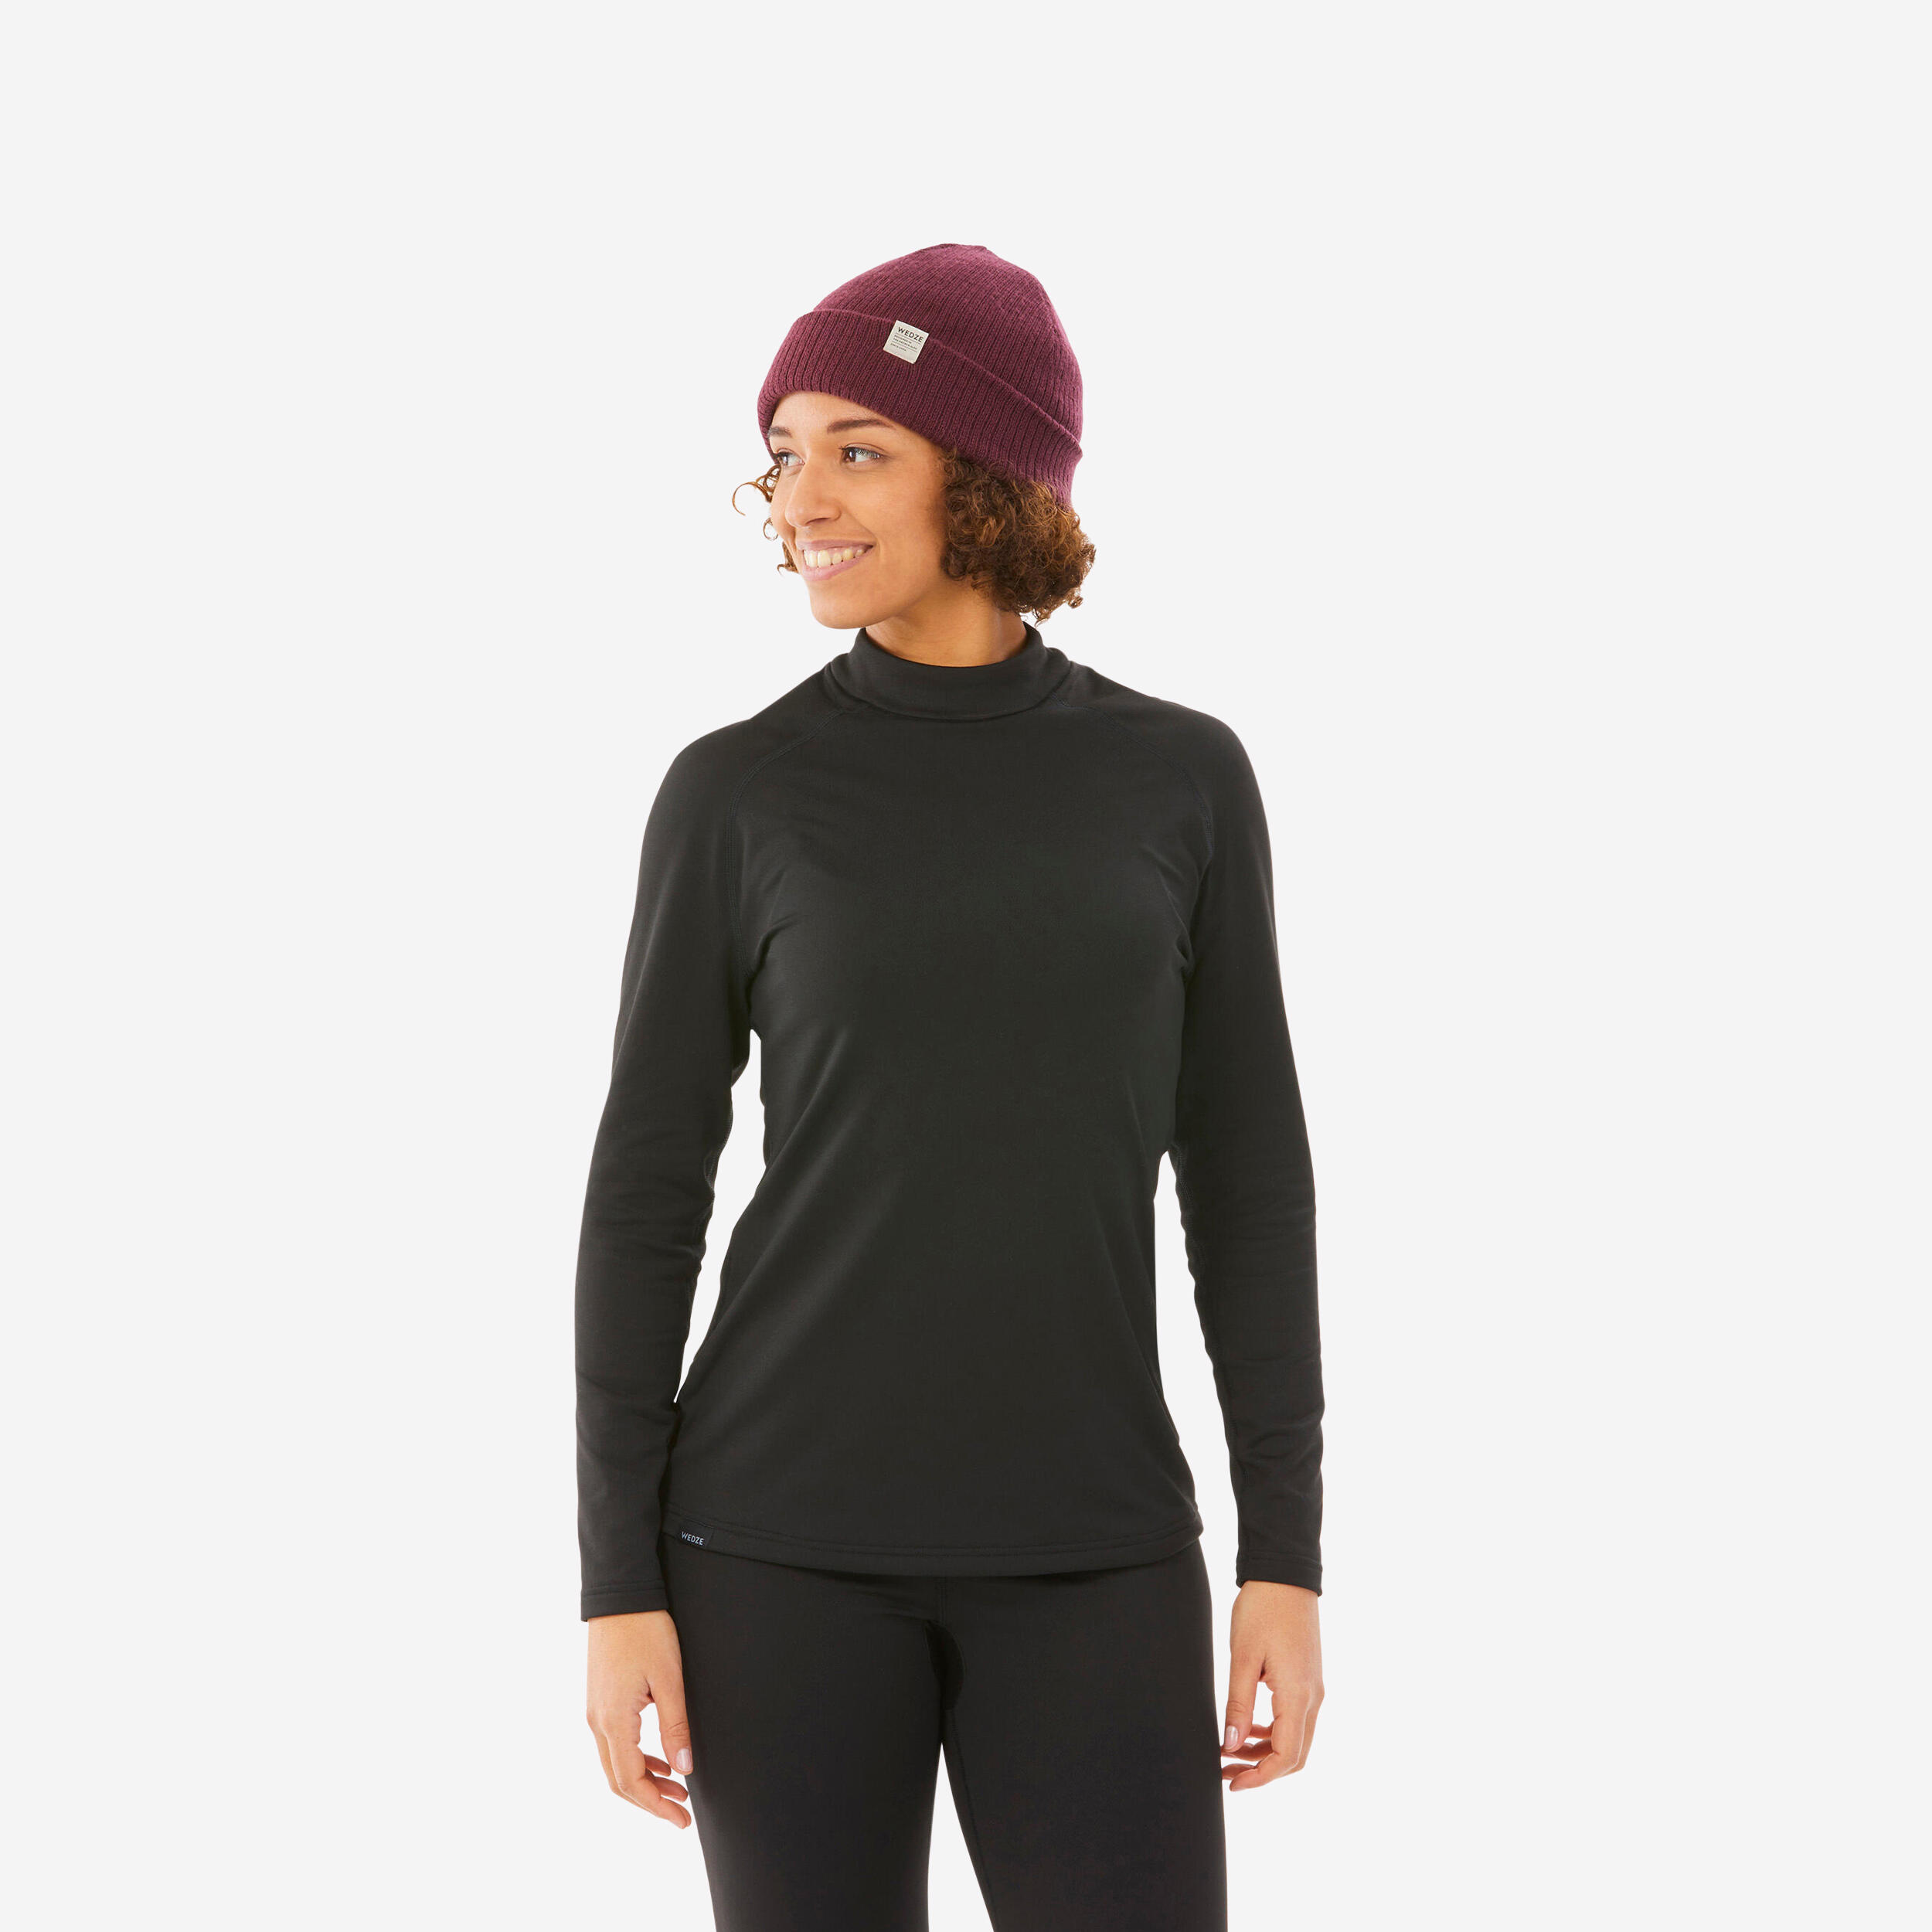 Women’s Breathable Base Layer Top